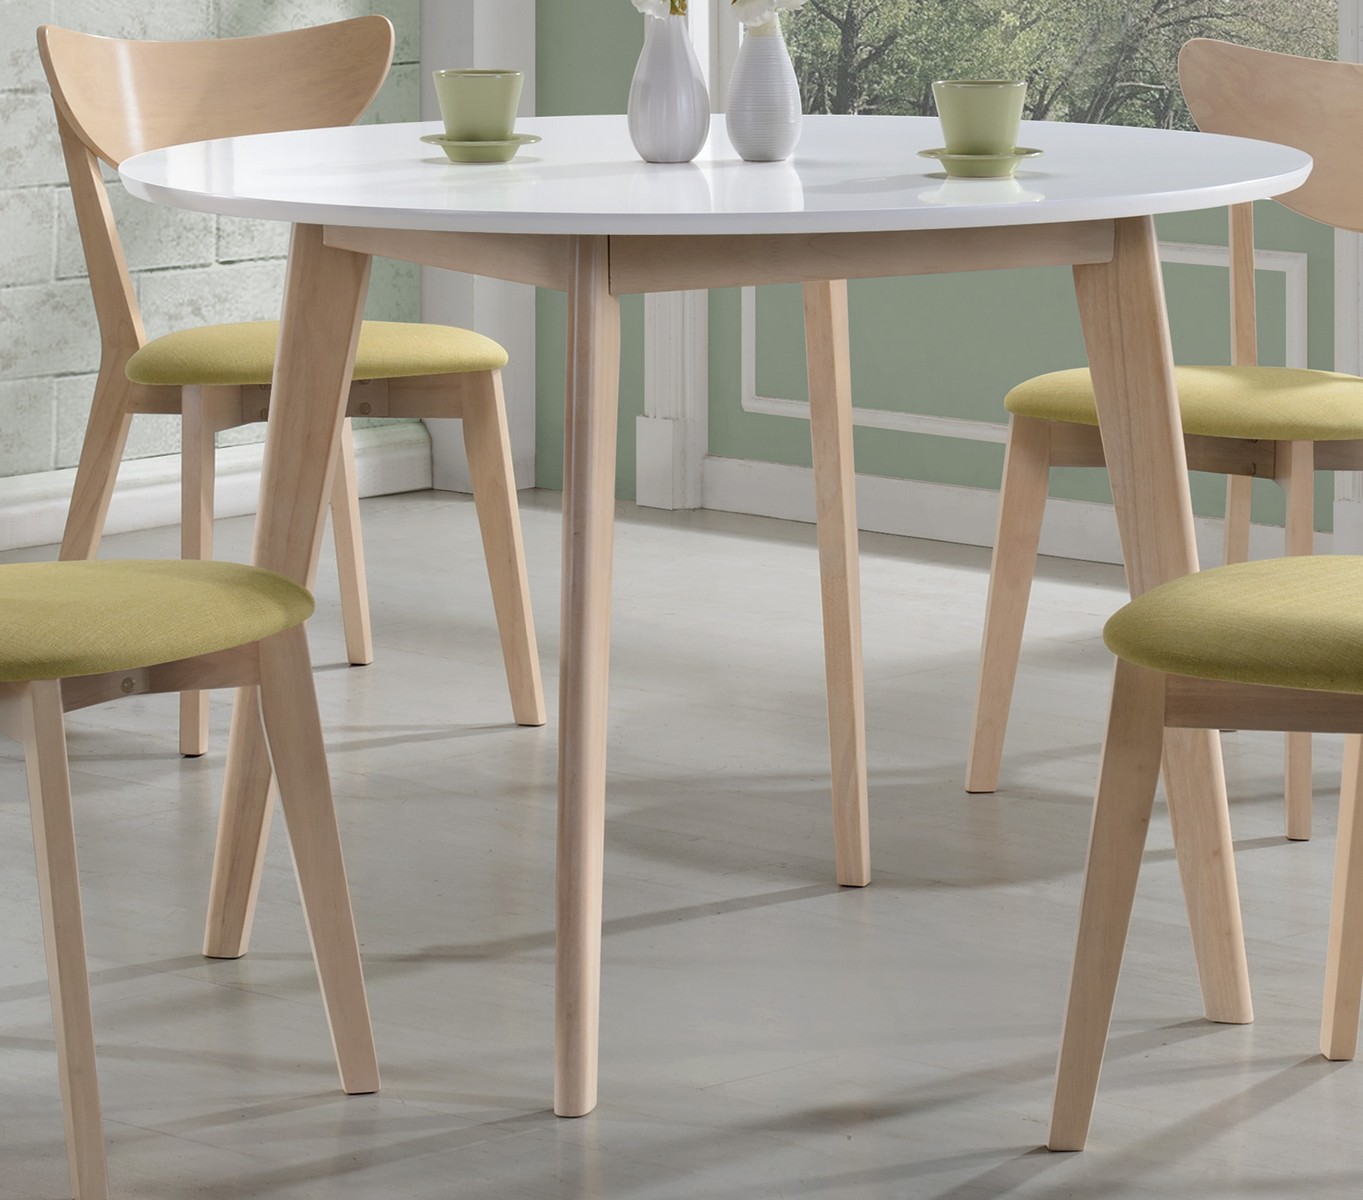 Coaster Appel Dining Table - White - White Wash